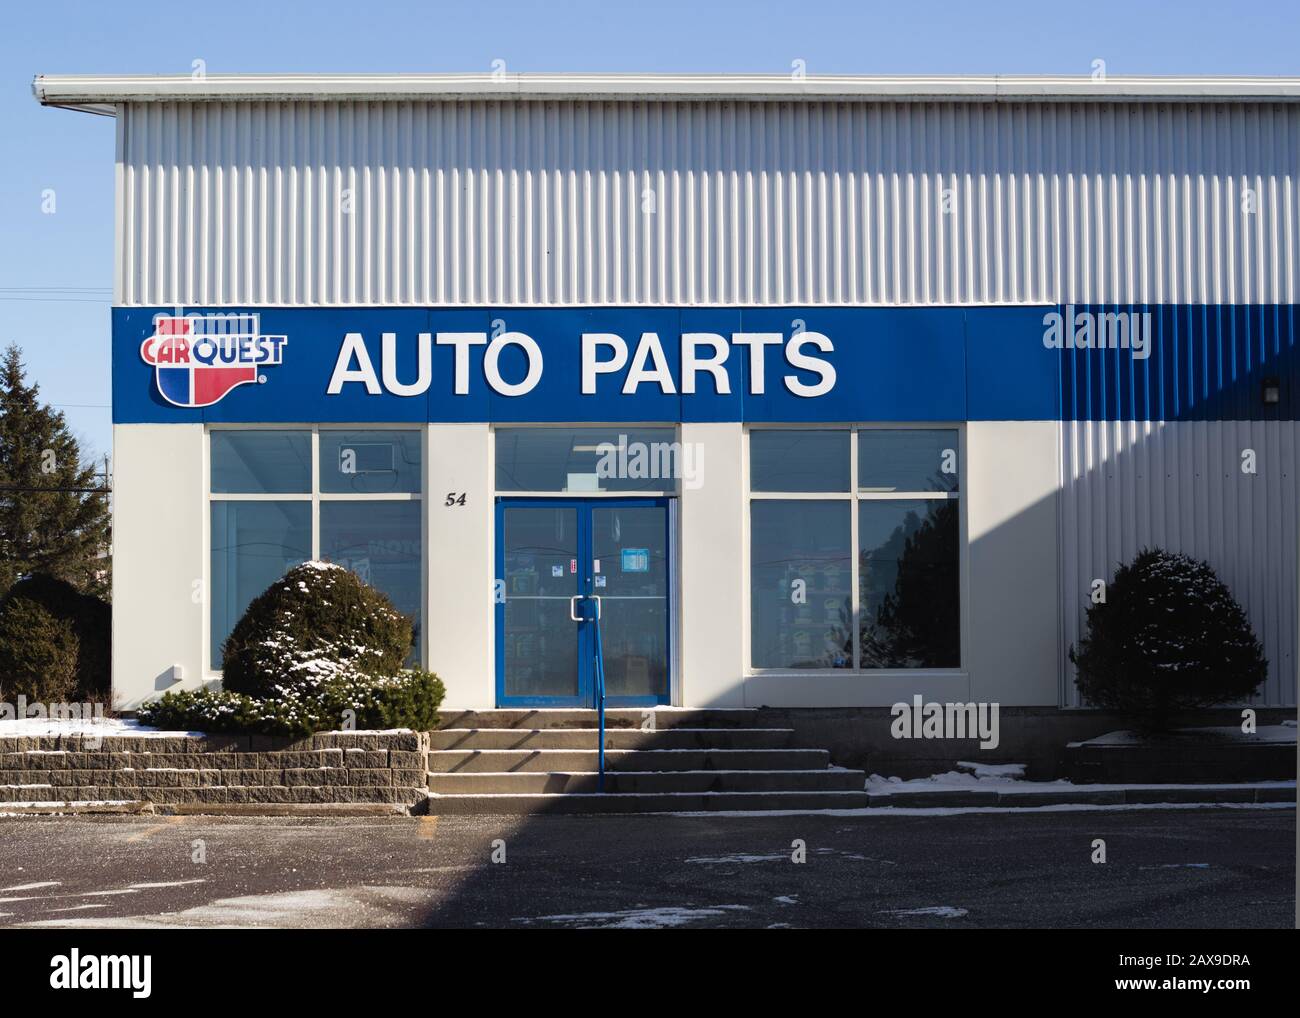 Truro Canada February 09 Carquest Auto Parts Outlet Carquest Corporation Is An American Automotive Parts Company Owned By Advance Auto Part Stock Photo Alamy